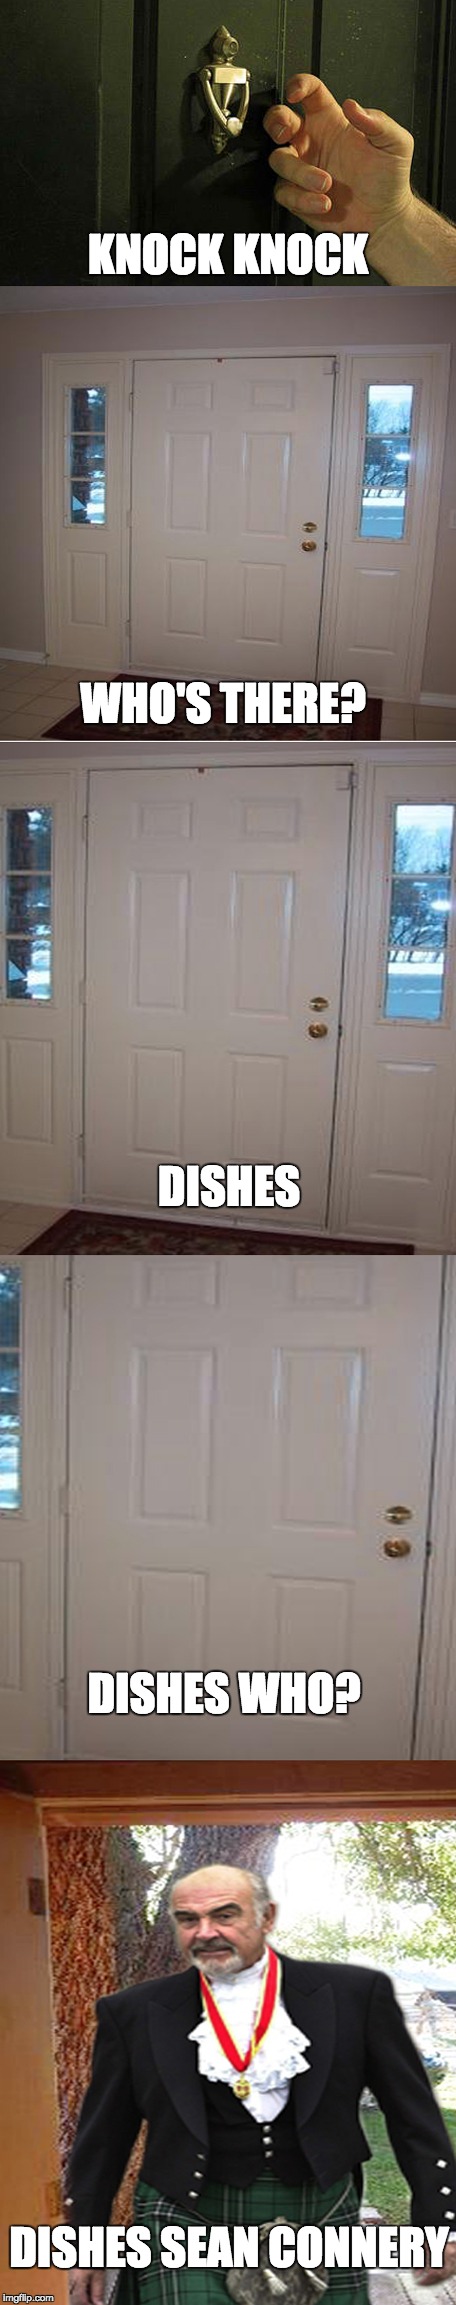 Don't worry, it's not THAT long | KNOCK KNOCK; WHO'S THERE? DISHES; DISHES WHO? DISHES SEAN CONNERY | image tagged in sean connery,knock knock,funny memes | made w/ Imgflip meme maker